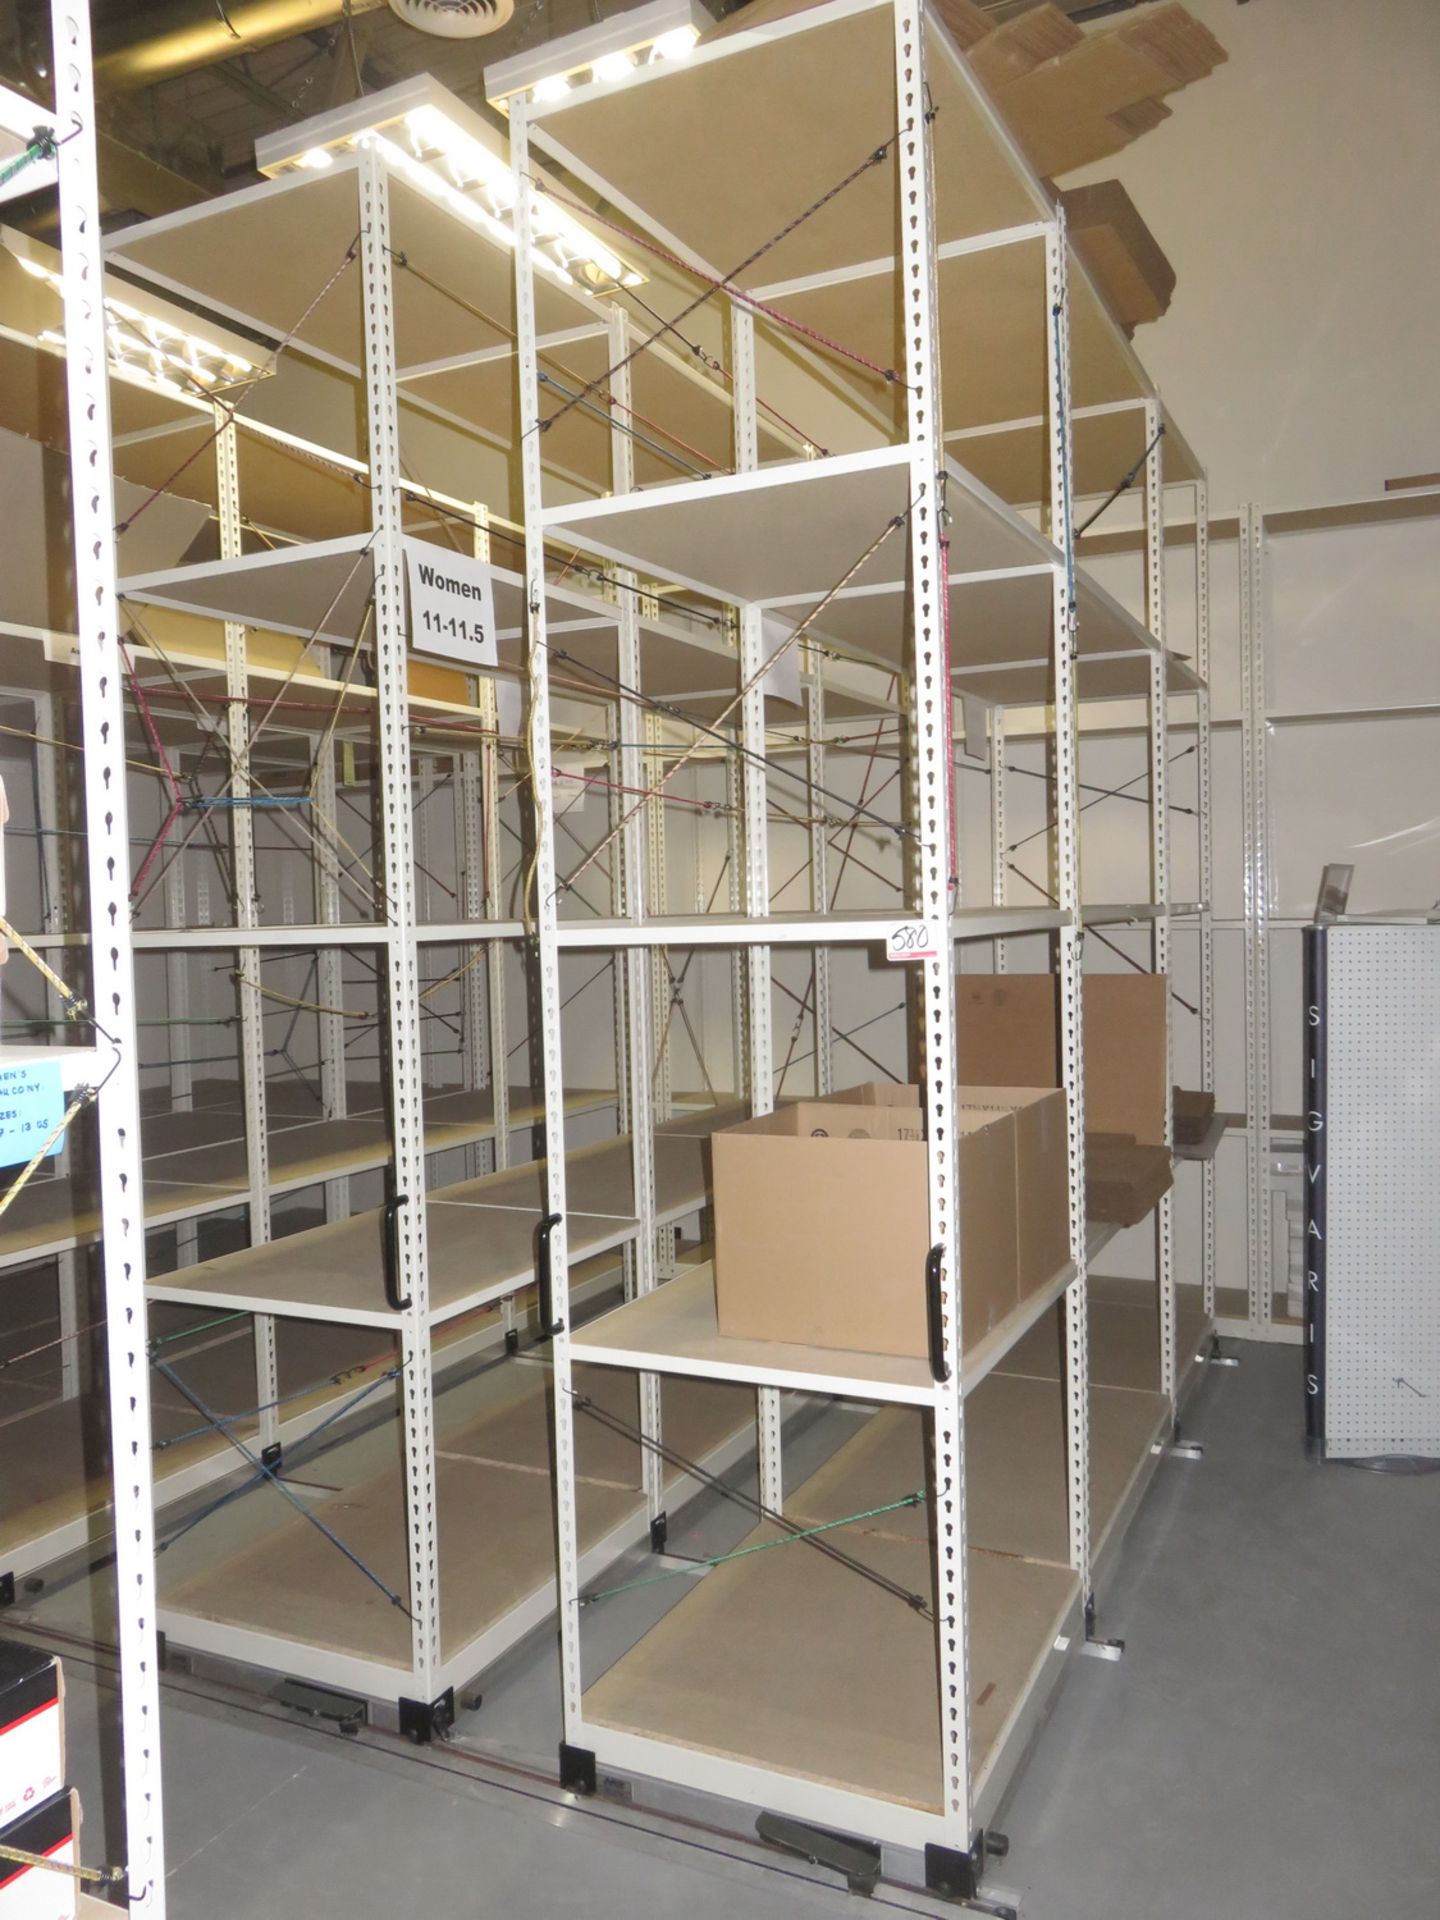 LOT - SPACE SAVER SHELVING STORAGE SYSTEM C/W(15) SECTIONS BEIGE STEEL & WOOD SHELF SHELVING - Image 2 of 2